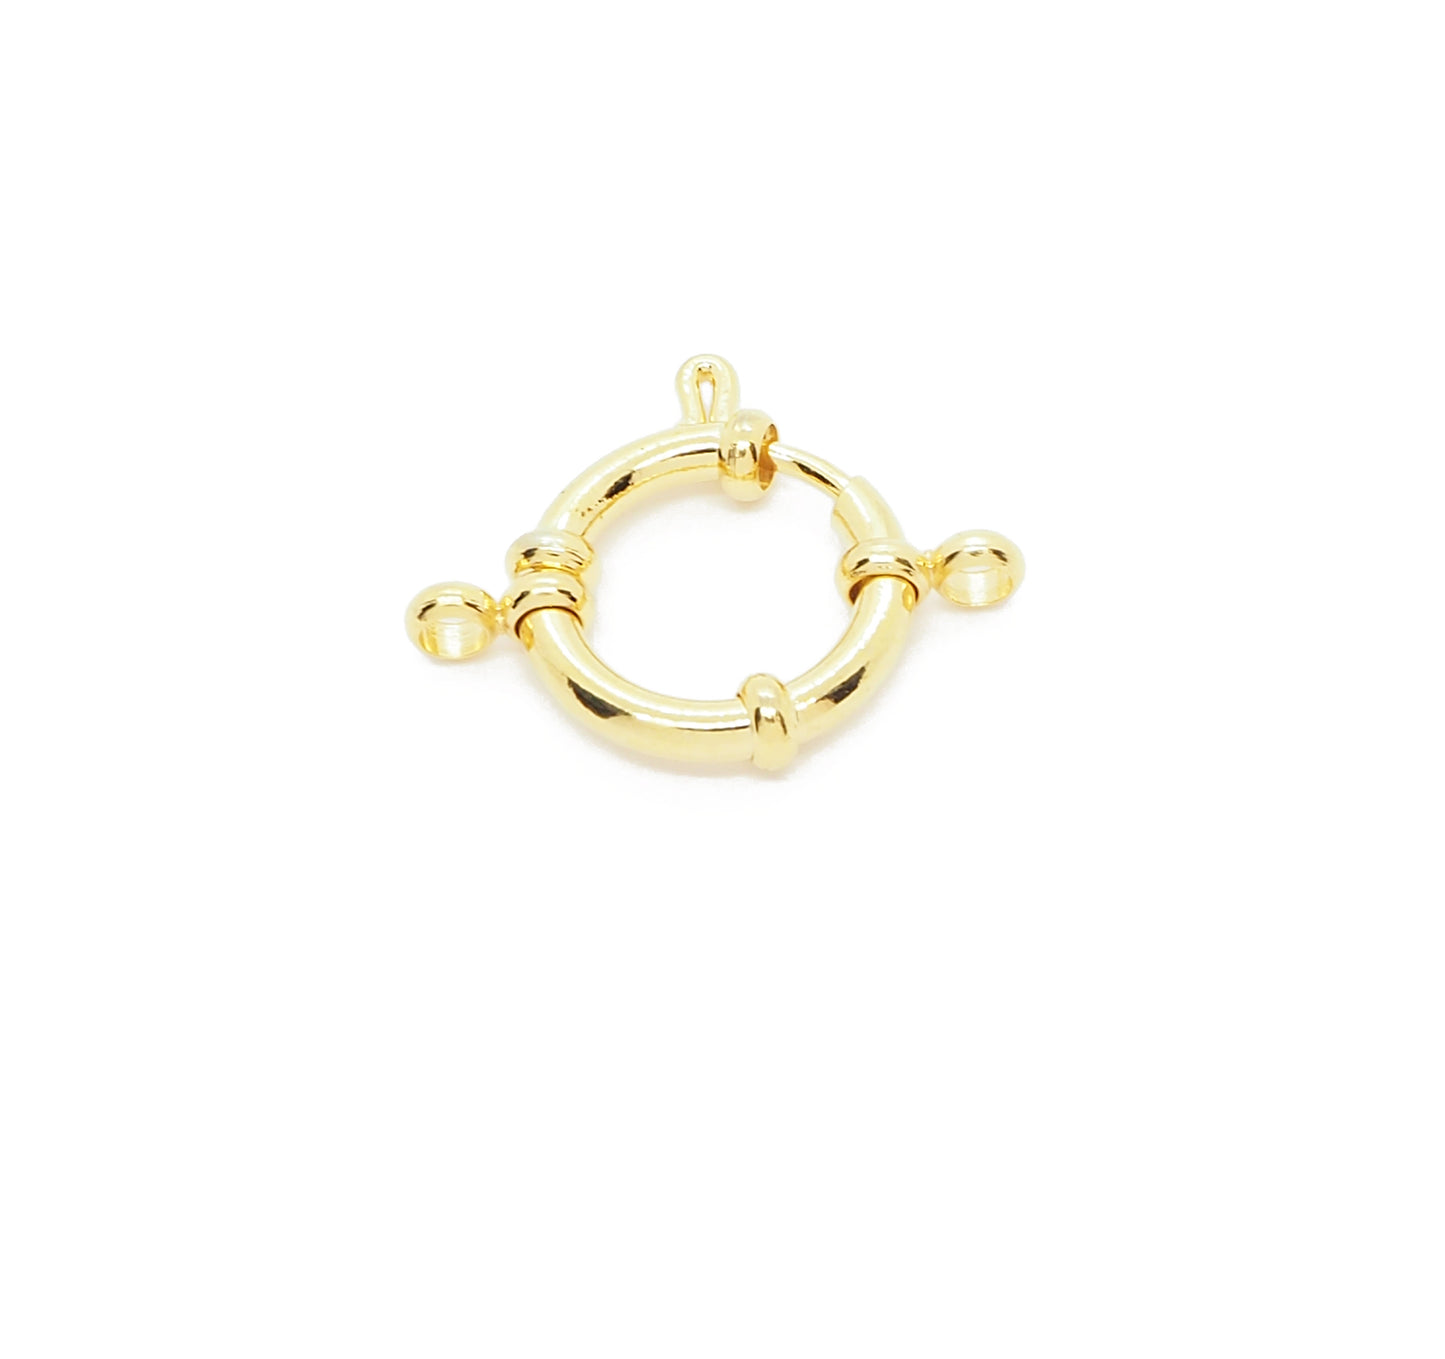 Spring ring clasp / gold-plated stainless steel